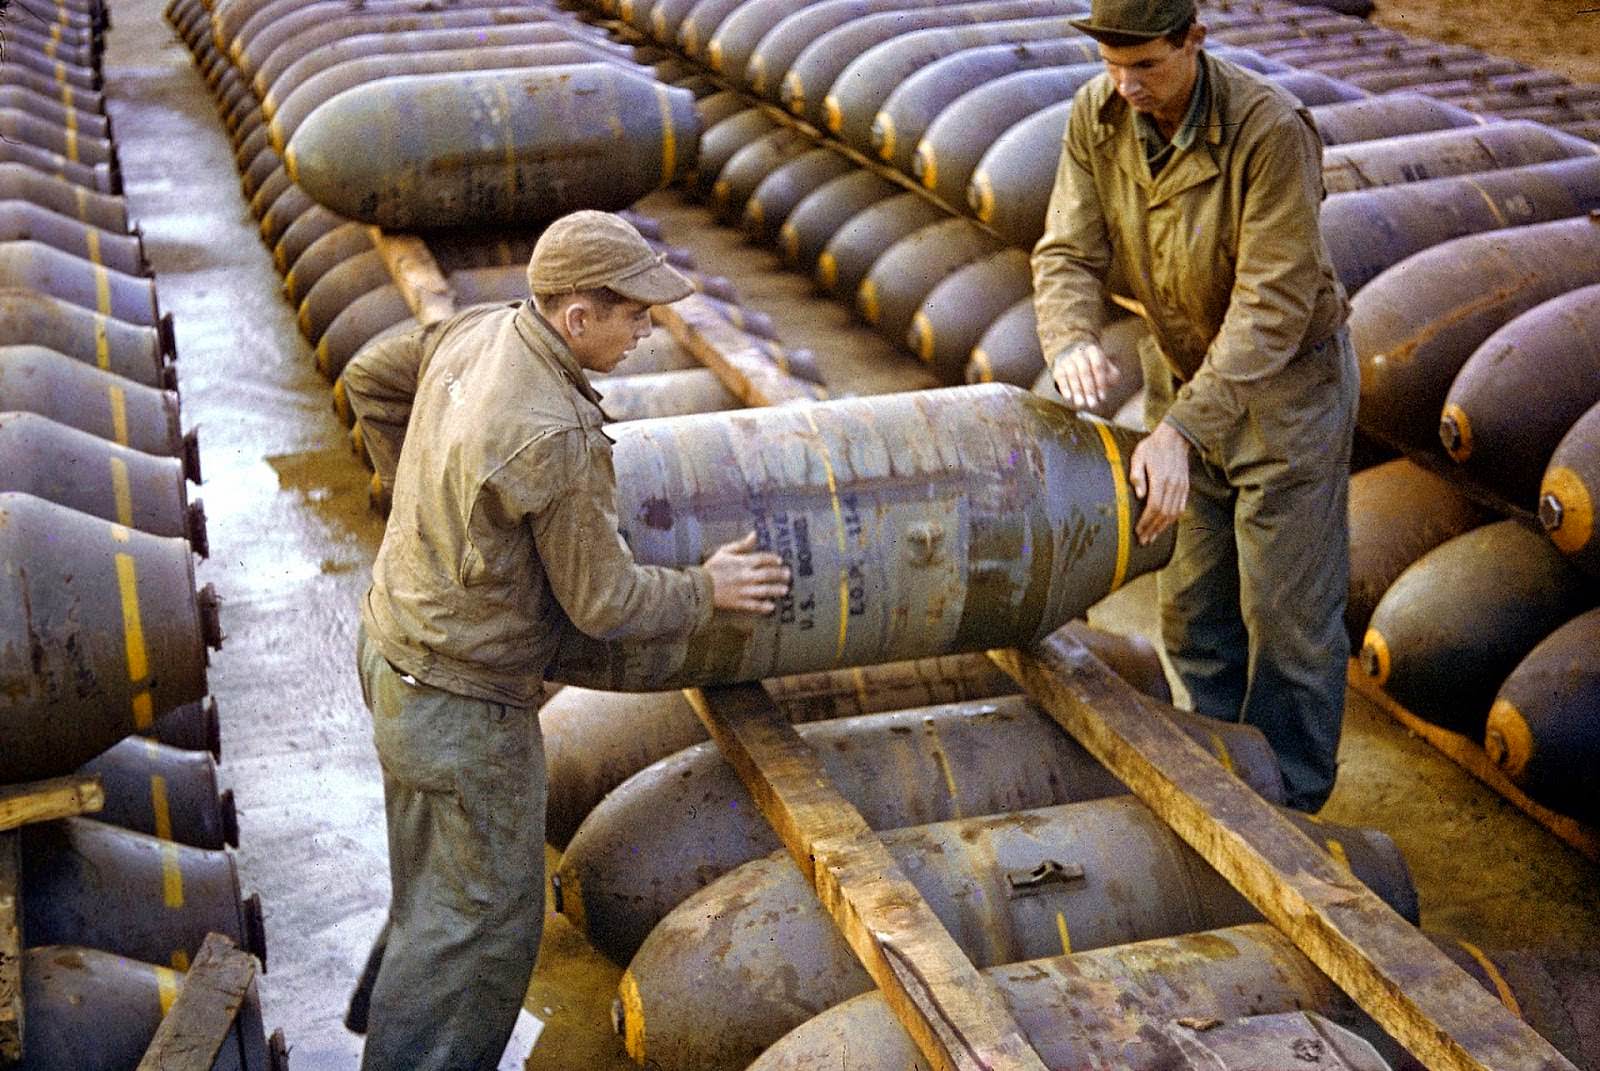 American servicemen moving a large bomb at an ammunition dump in 1944.